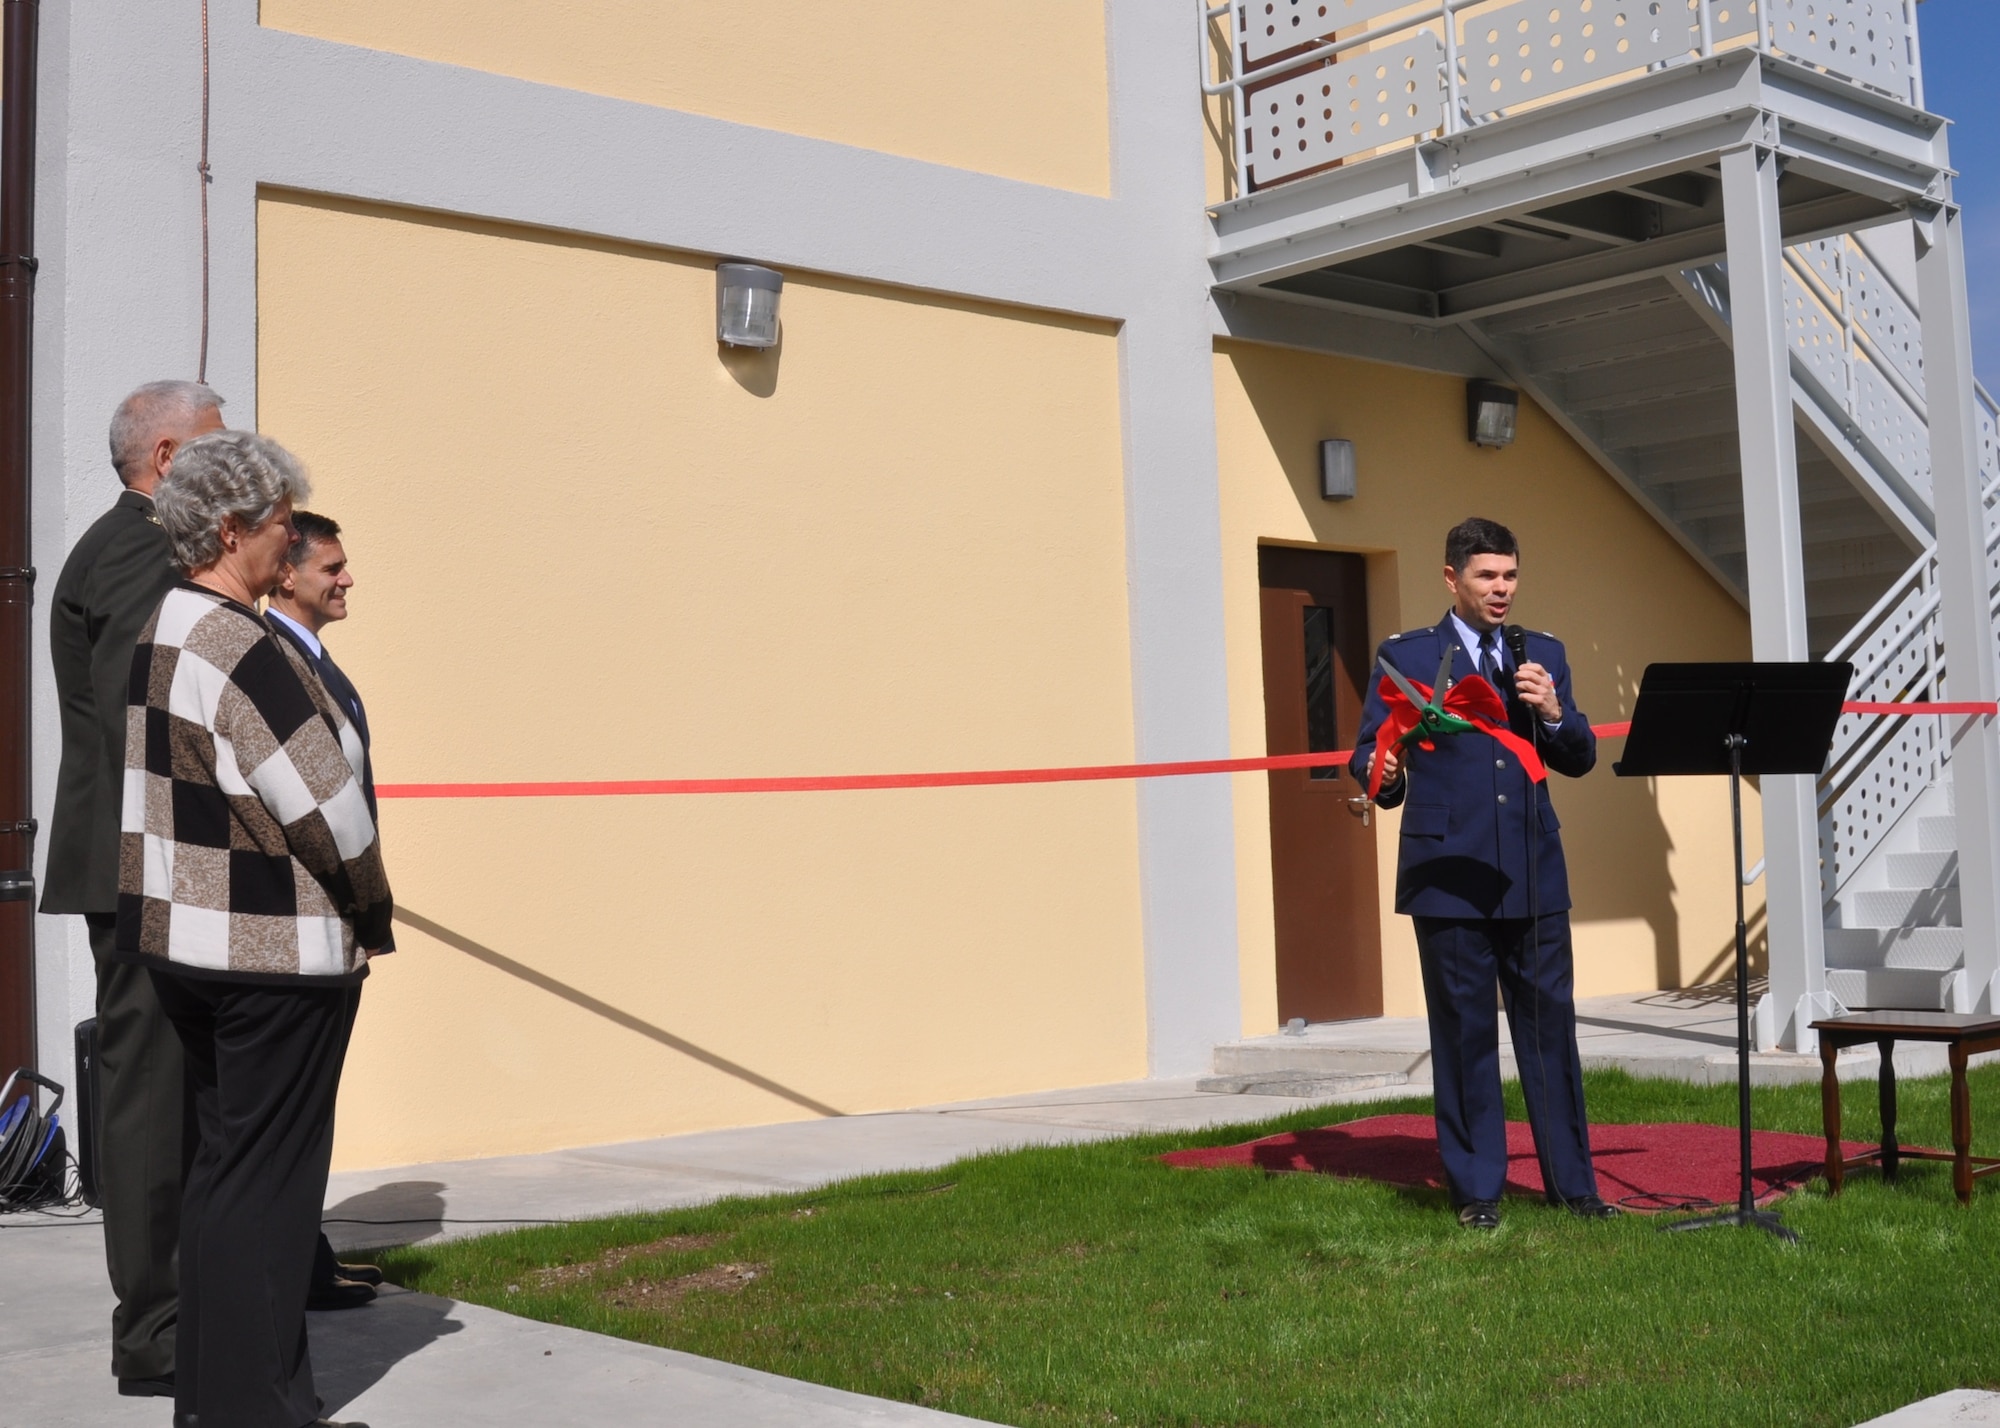 U.S. Air Force Lt. Col. Emanuel Cohan, 717th Air Base Squadron commander, prepares for the ribbon cutting ceremony March 26, 2015, at the Ankara Support Facility in Turkey. The new administrative building, number 2621, will house the Post Office, the Traffic Management Office and the Legal Office. (U.S. Air Force photo by Capt. Laura Balch/Released) 